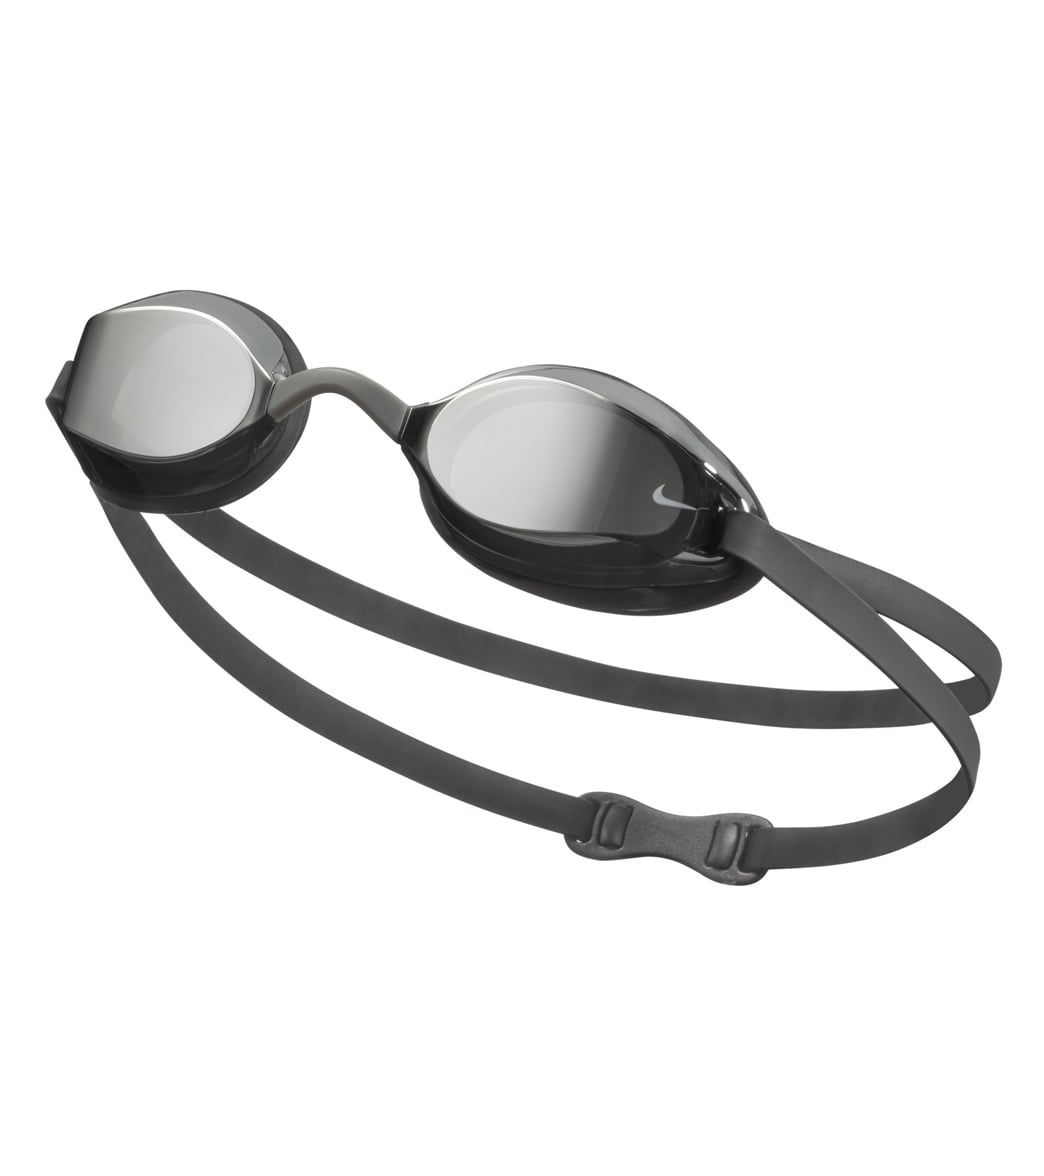 Nike Legacy Mirrored Goggle at SwimOutlet.com